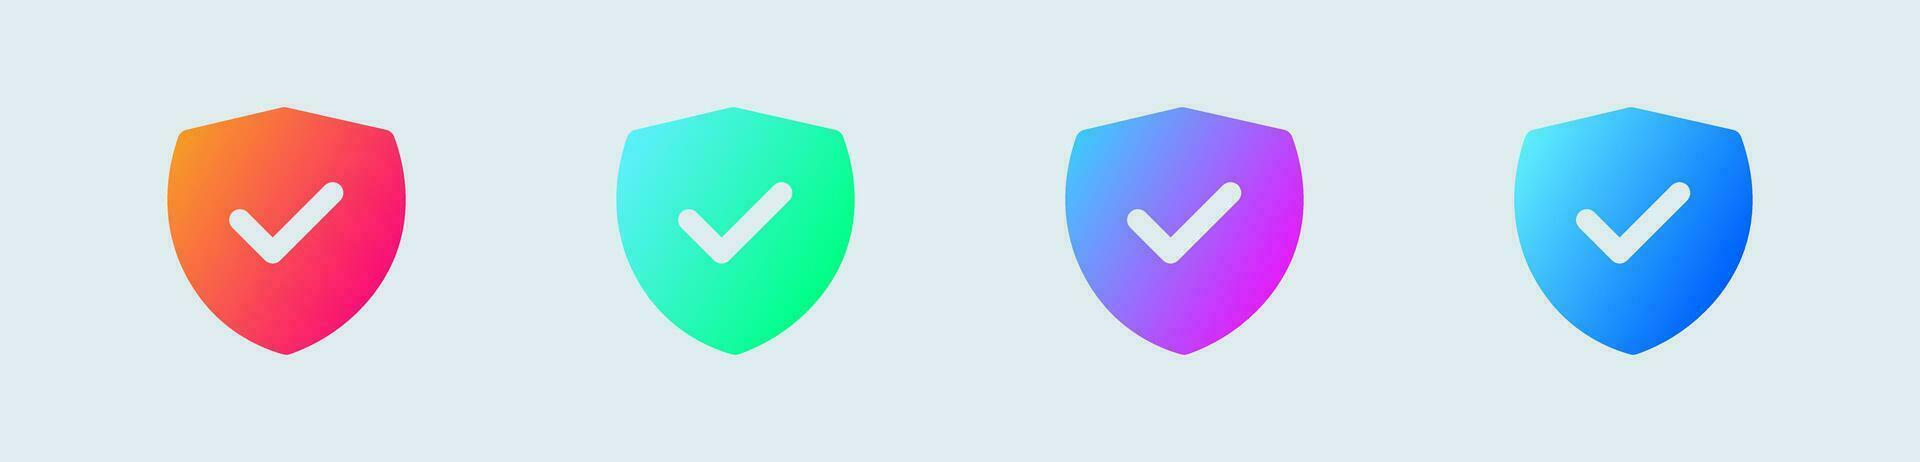 Trusted solid icon in gradient colors. Check mark signs vector illustration.